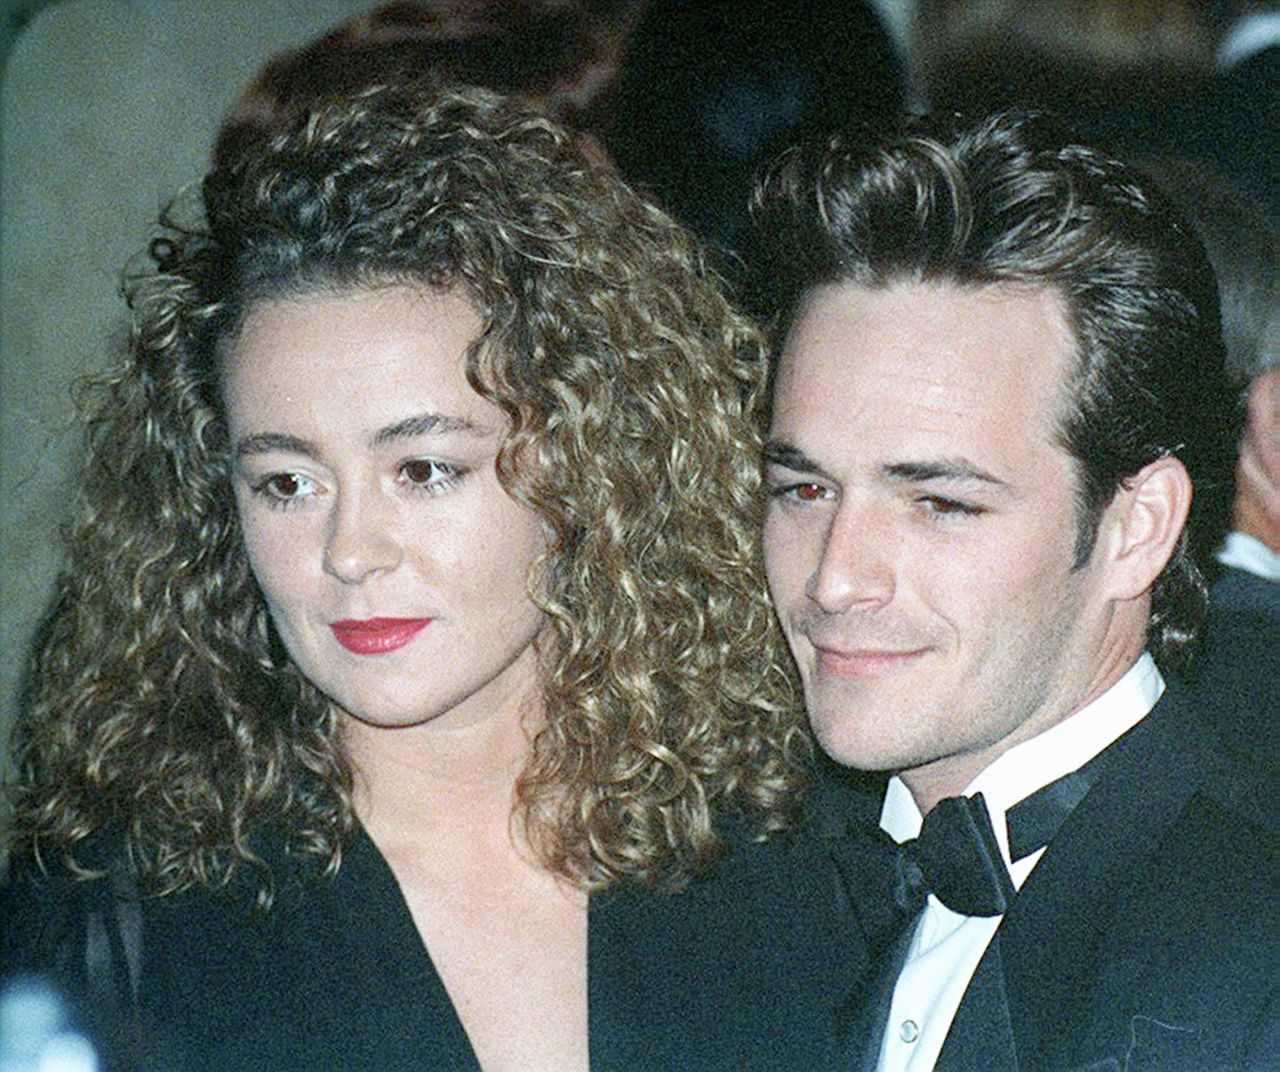 Perry married actress Rachel Sharp in 1993. They had a son and a daughter and divorced in 2003.